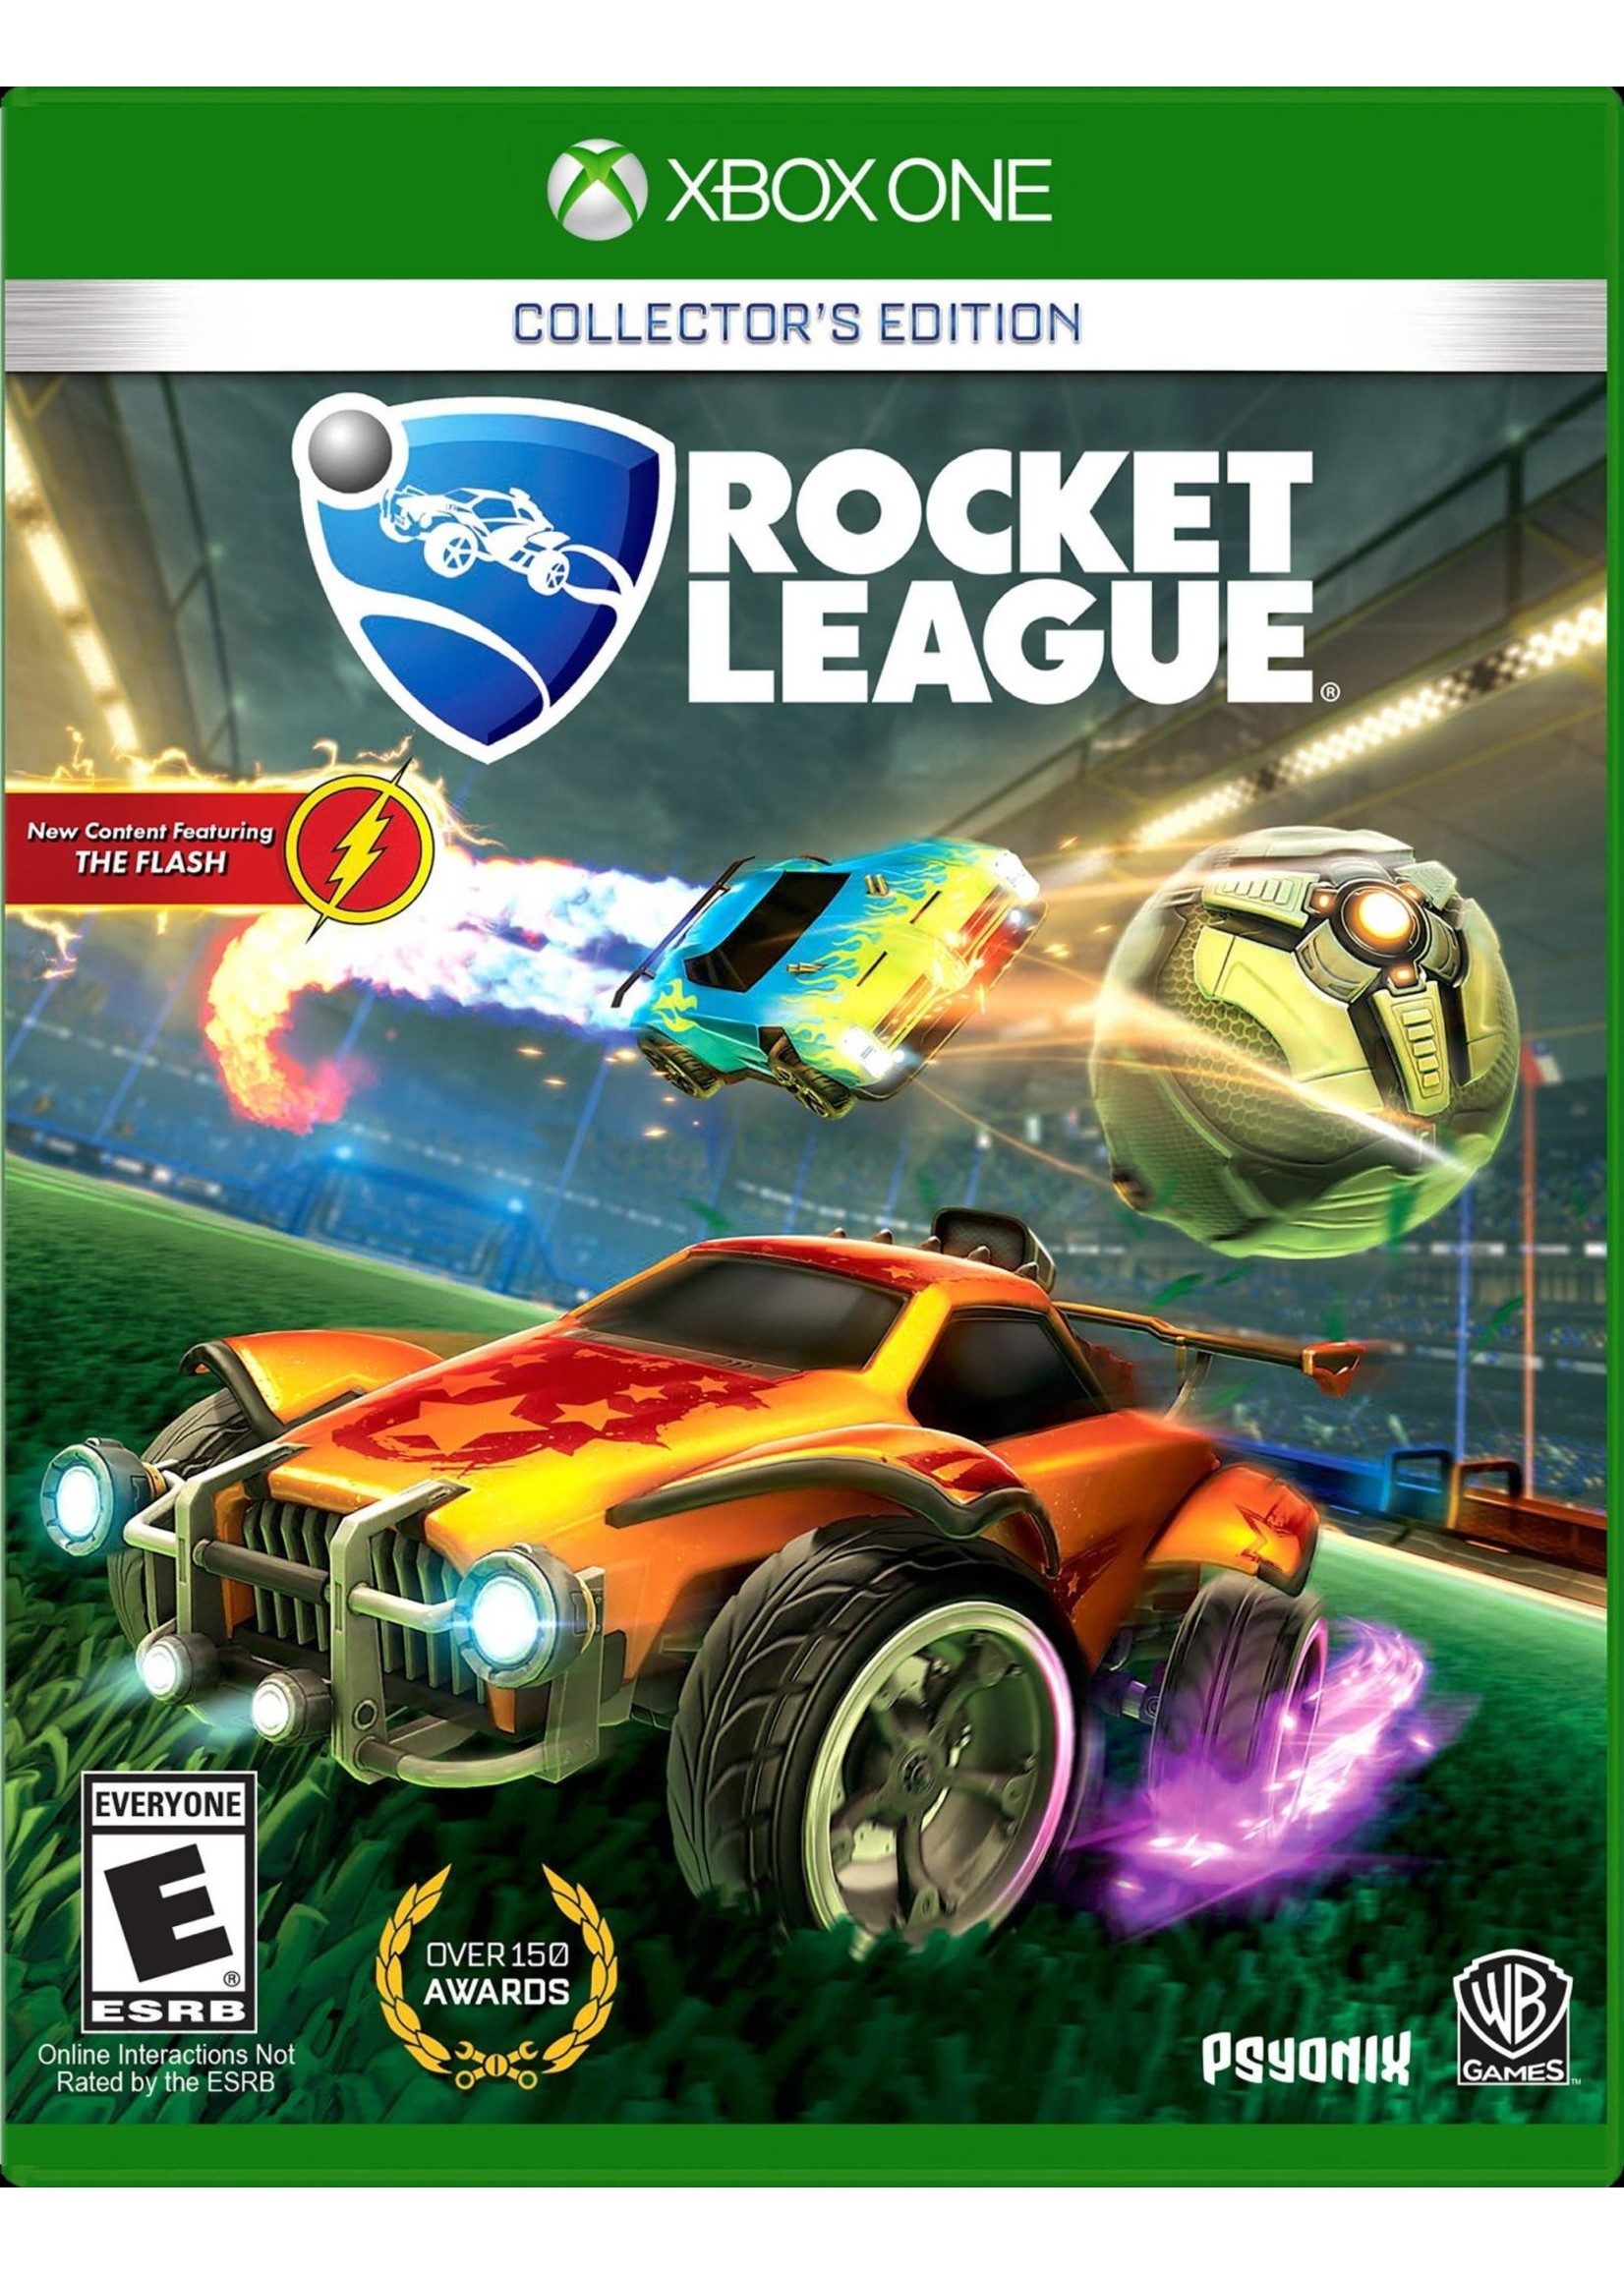 Microsoft Xbox One Rocket League Collector's Edition